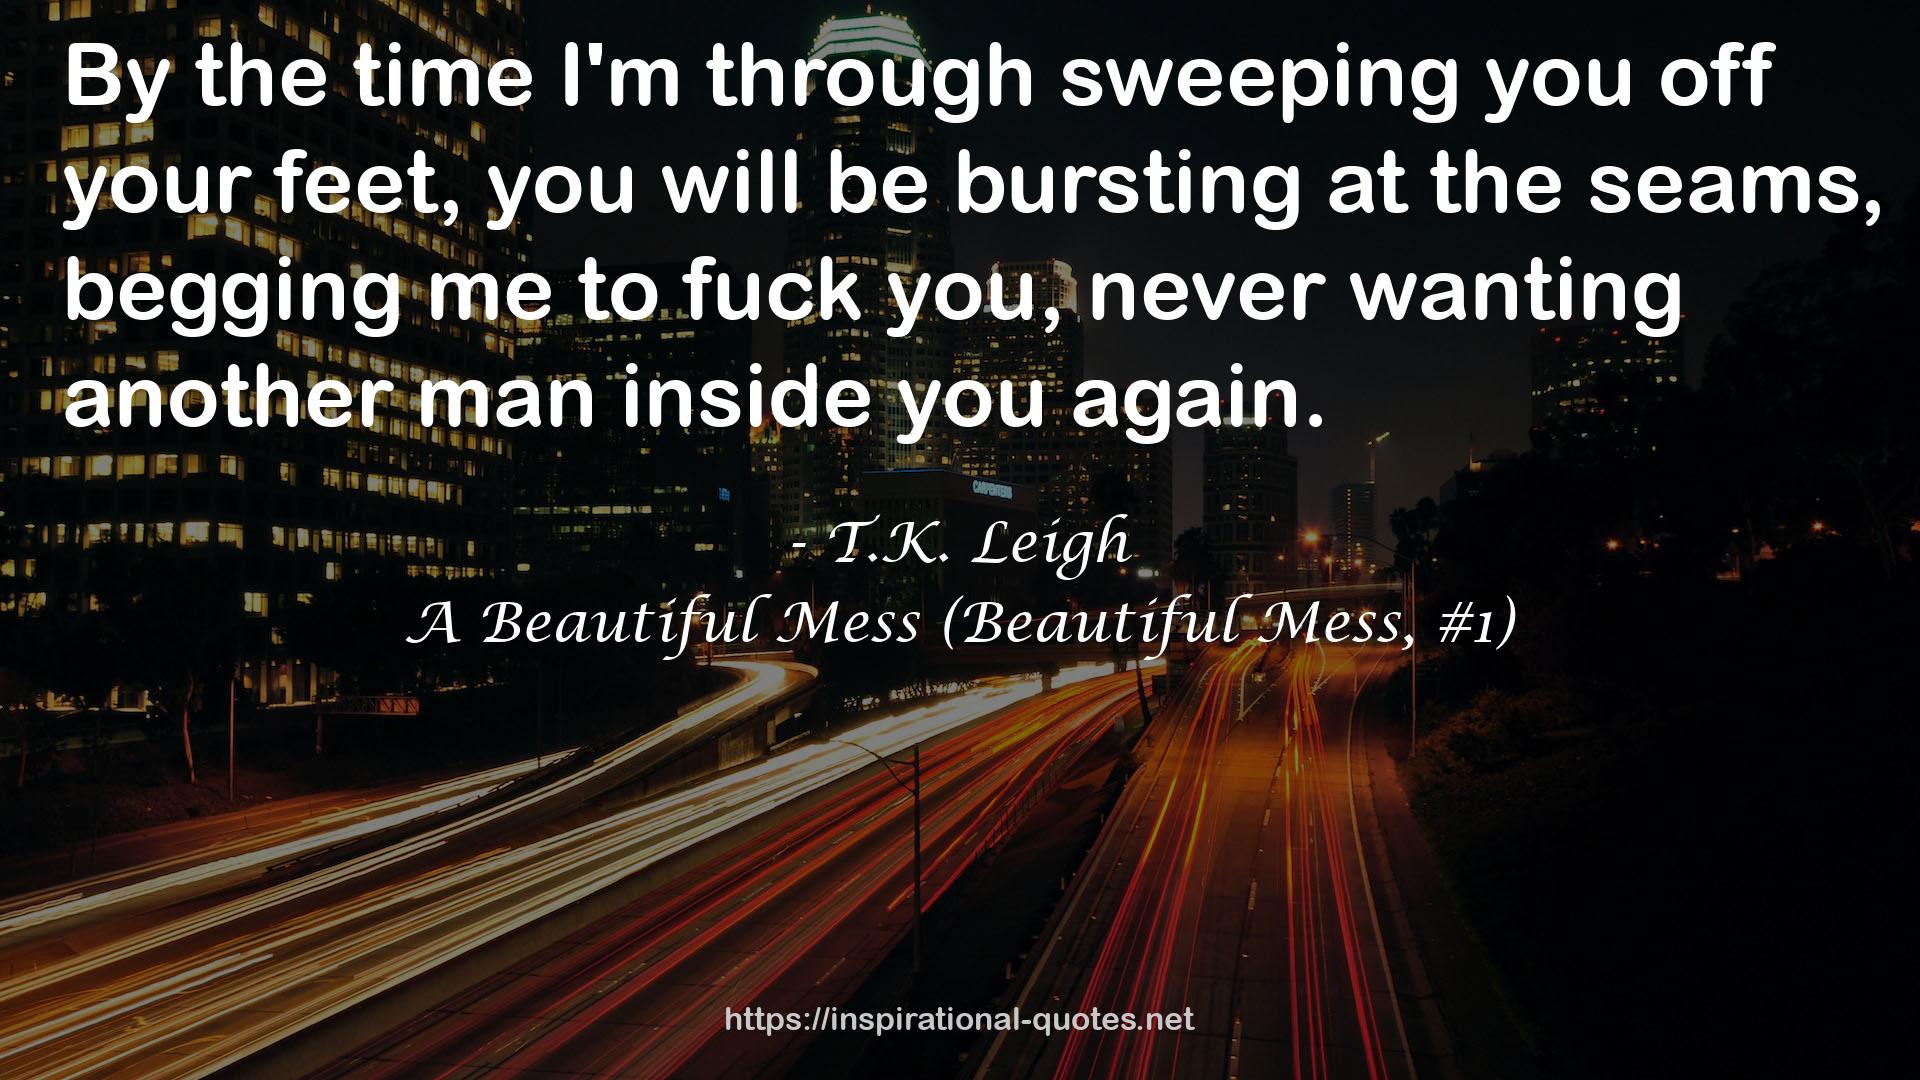 T.K. Leigh QUOTES